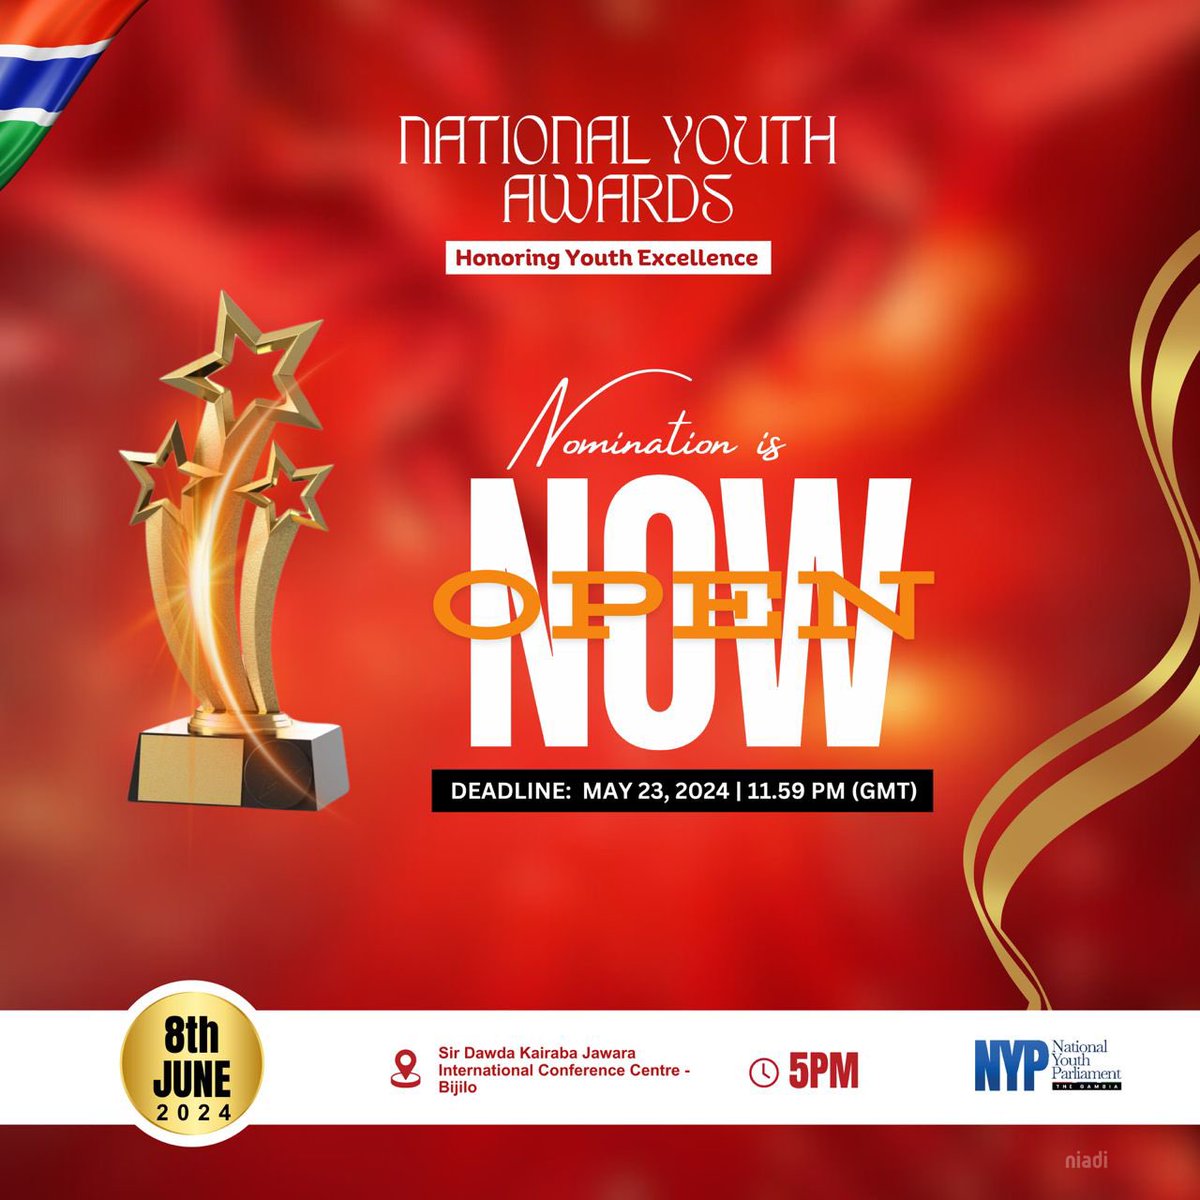 We are excited to announce that the nomination for the National Youth Awards is now open! This is your chance to recognize and celebrate the exceptional achievements and contributions of young individuals who are making a significant impact in their communities.